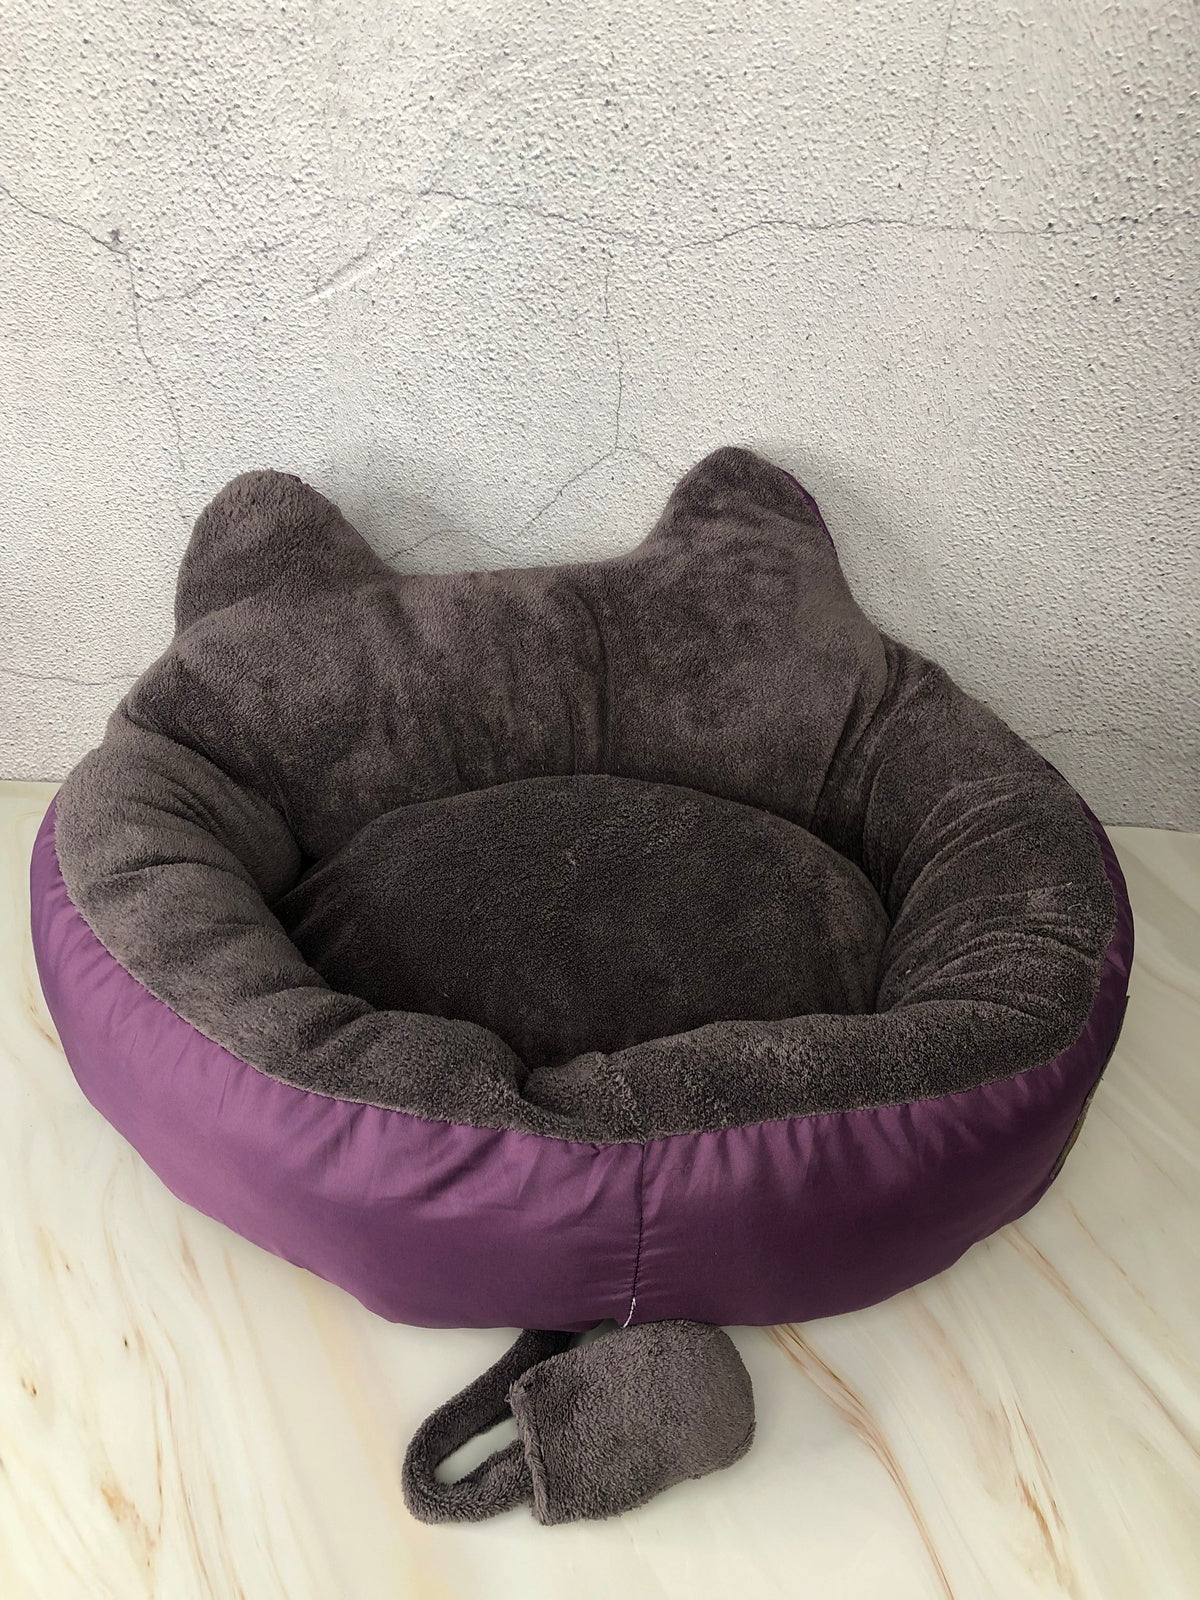 Round Cushion Cat/Puppy Bed with PlayBall pets-park-pk